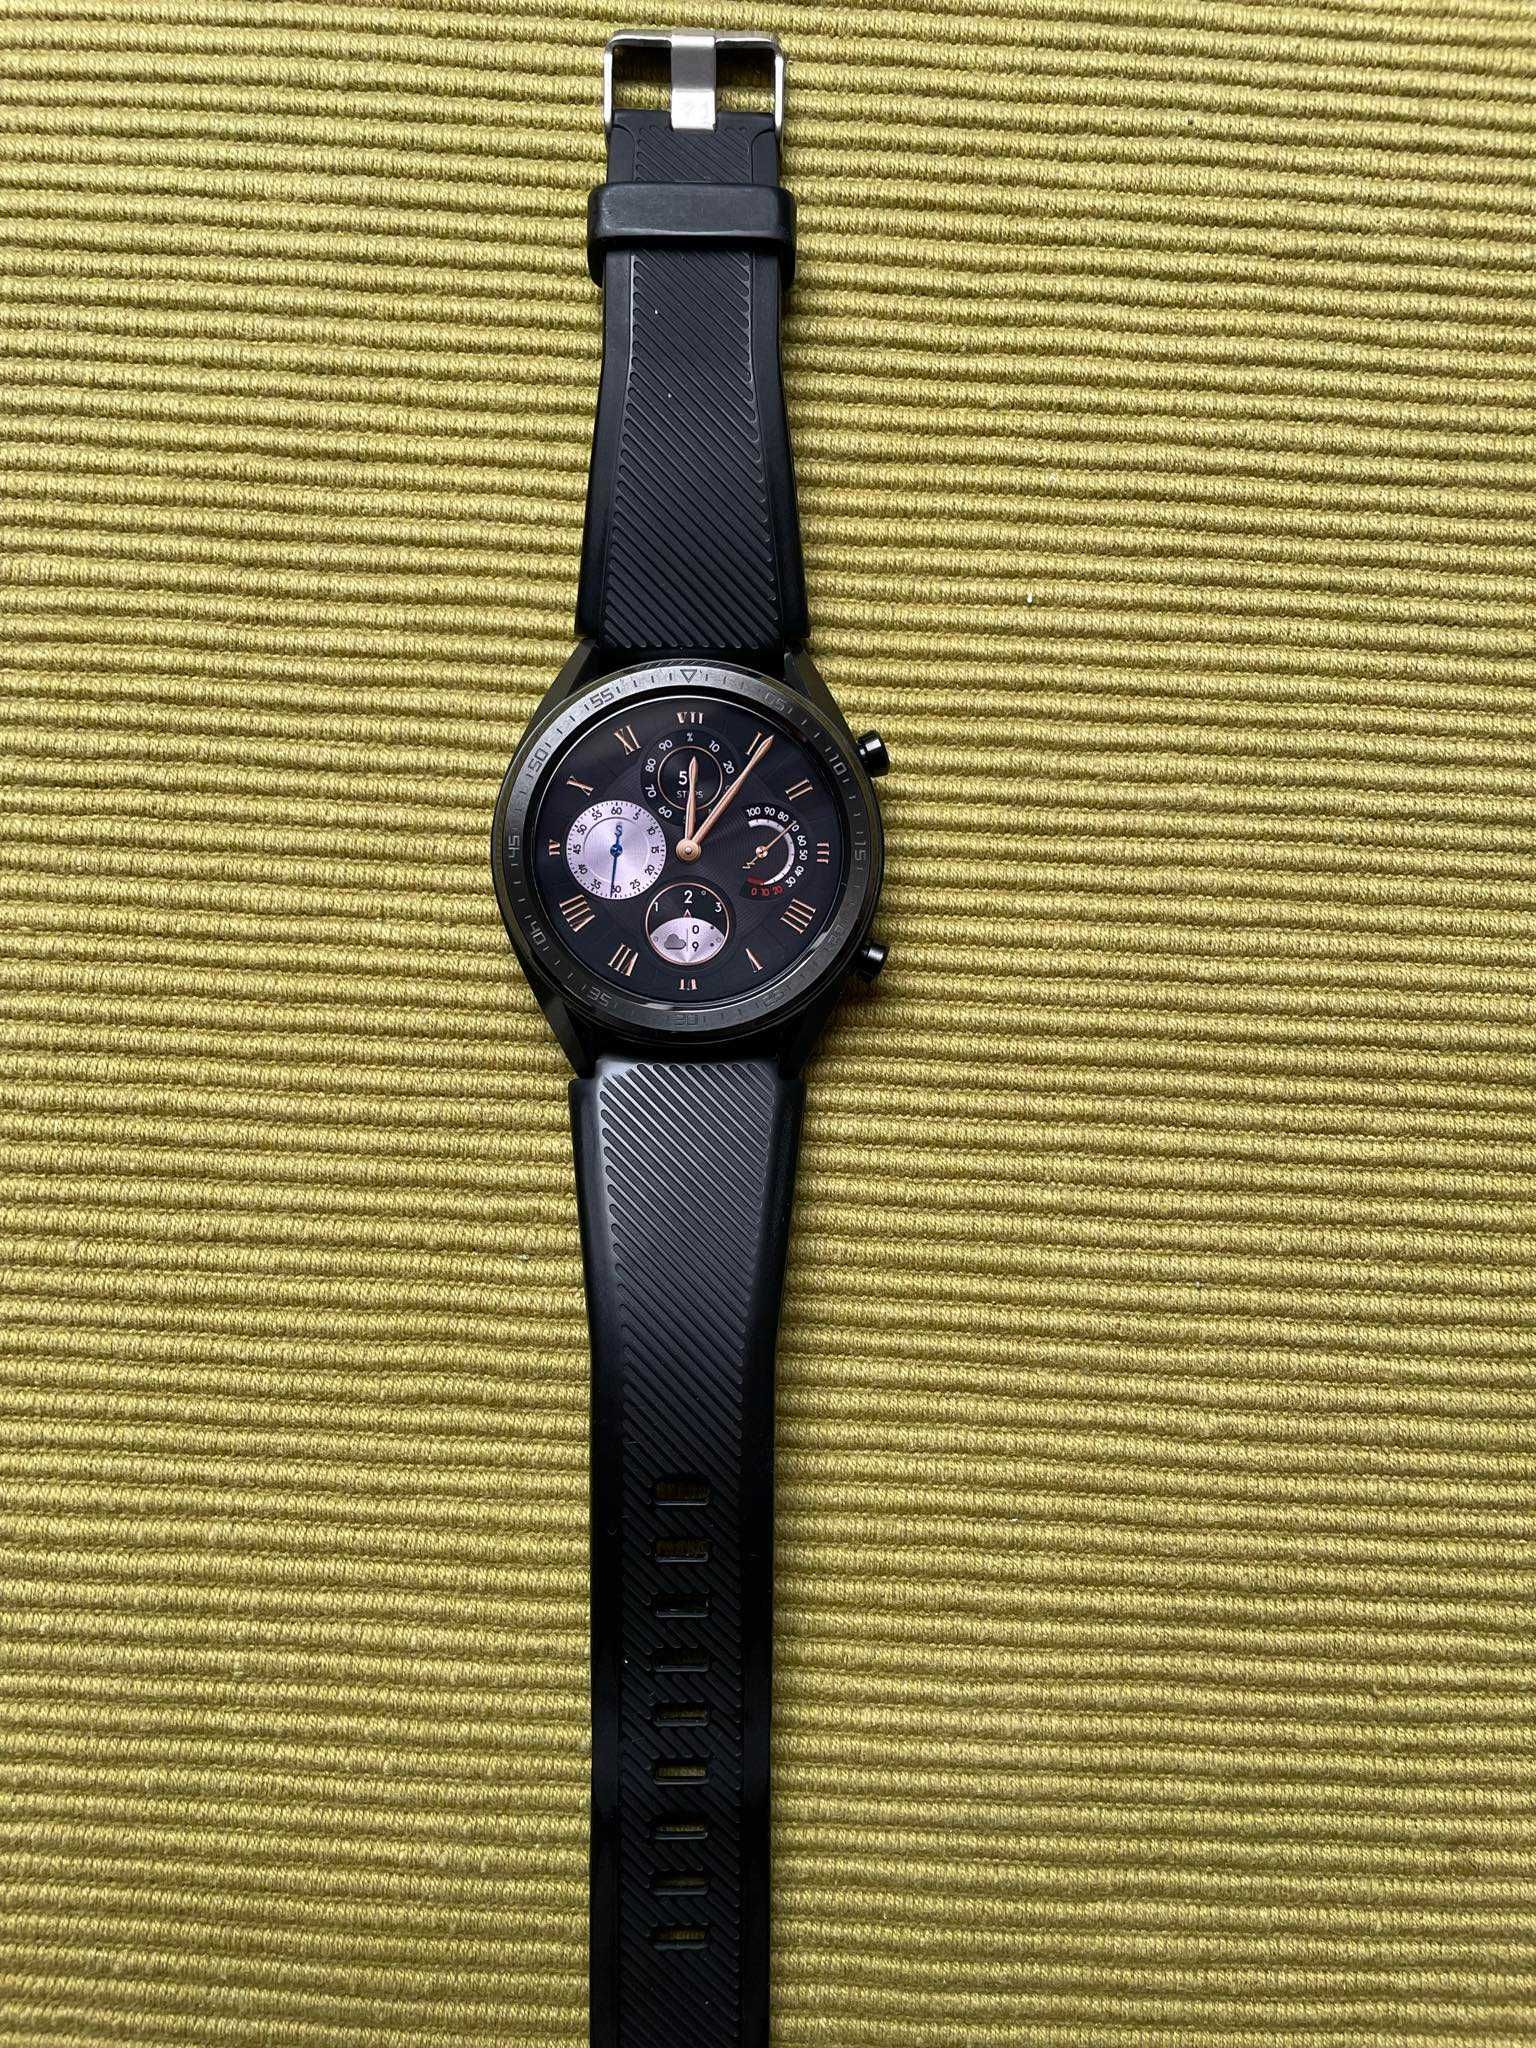 Vand Smartwatch HUAWEI GT impecabil